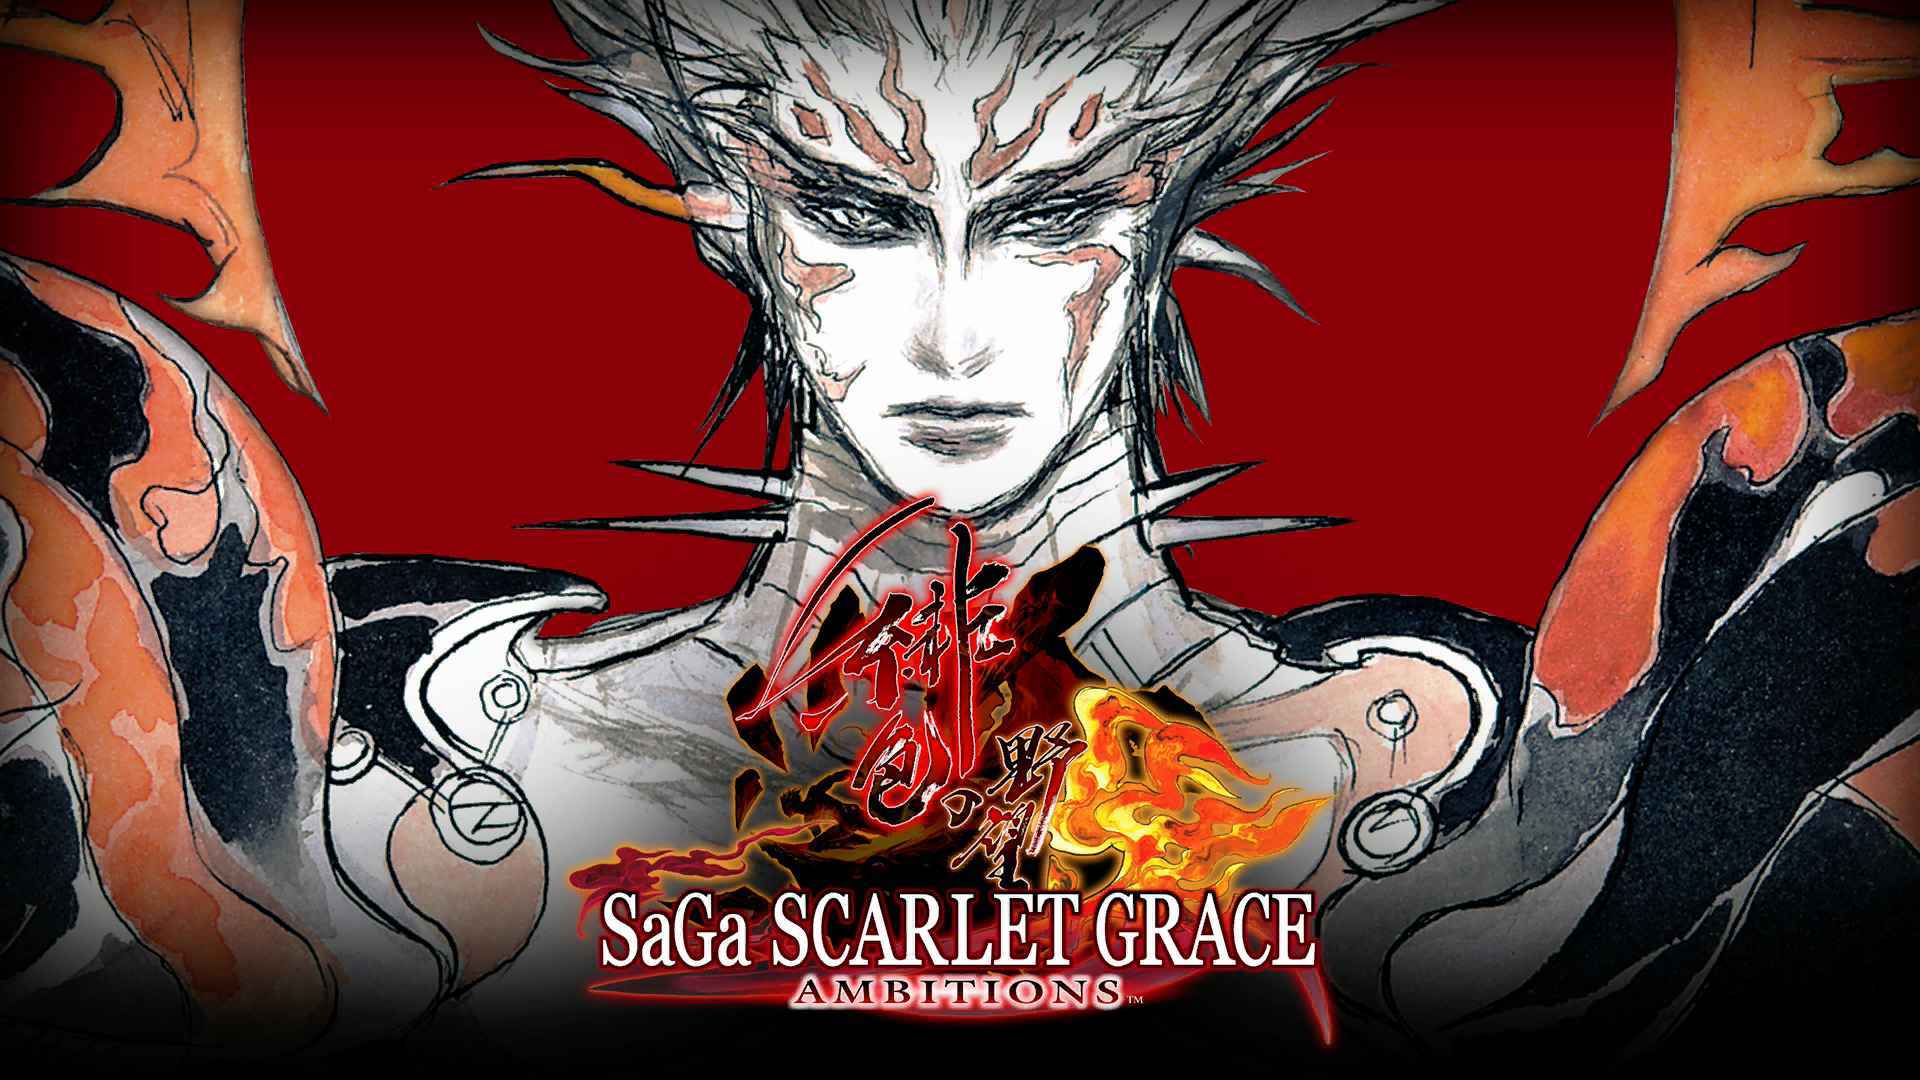 SaGa Scarlet Grace: Ambitions PS4 Review